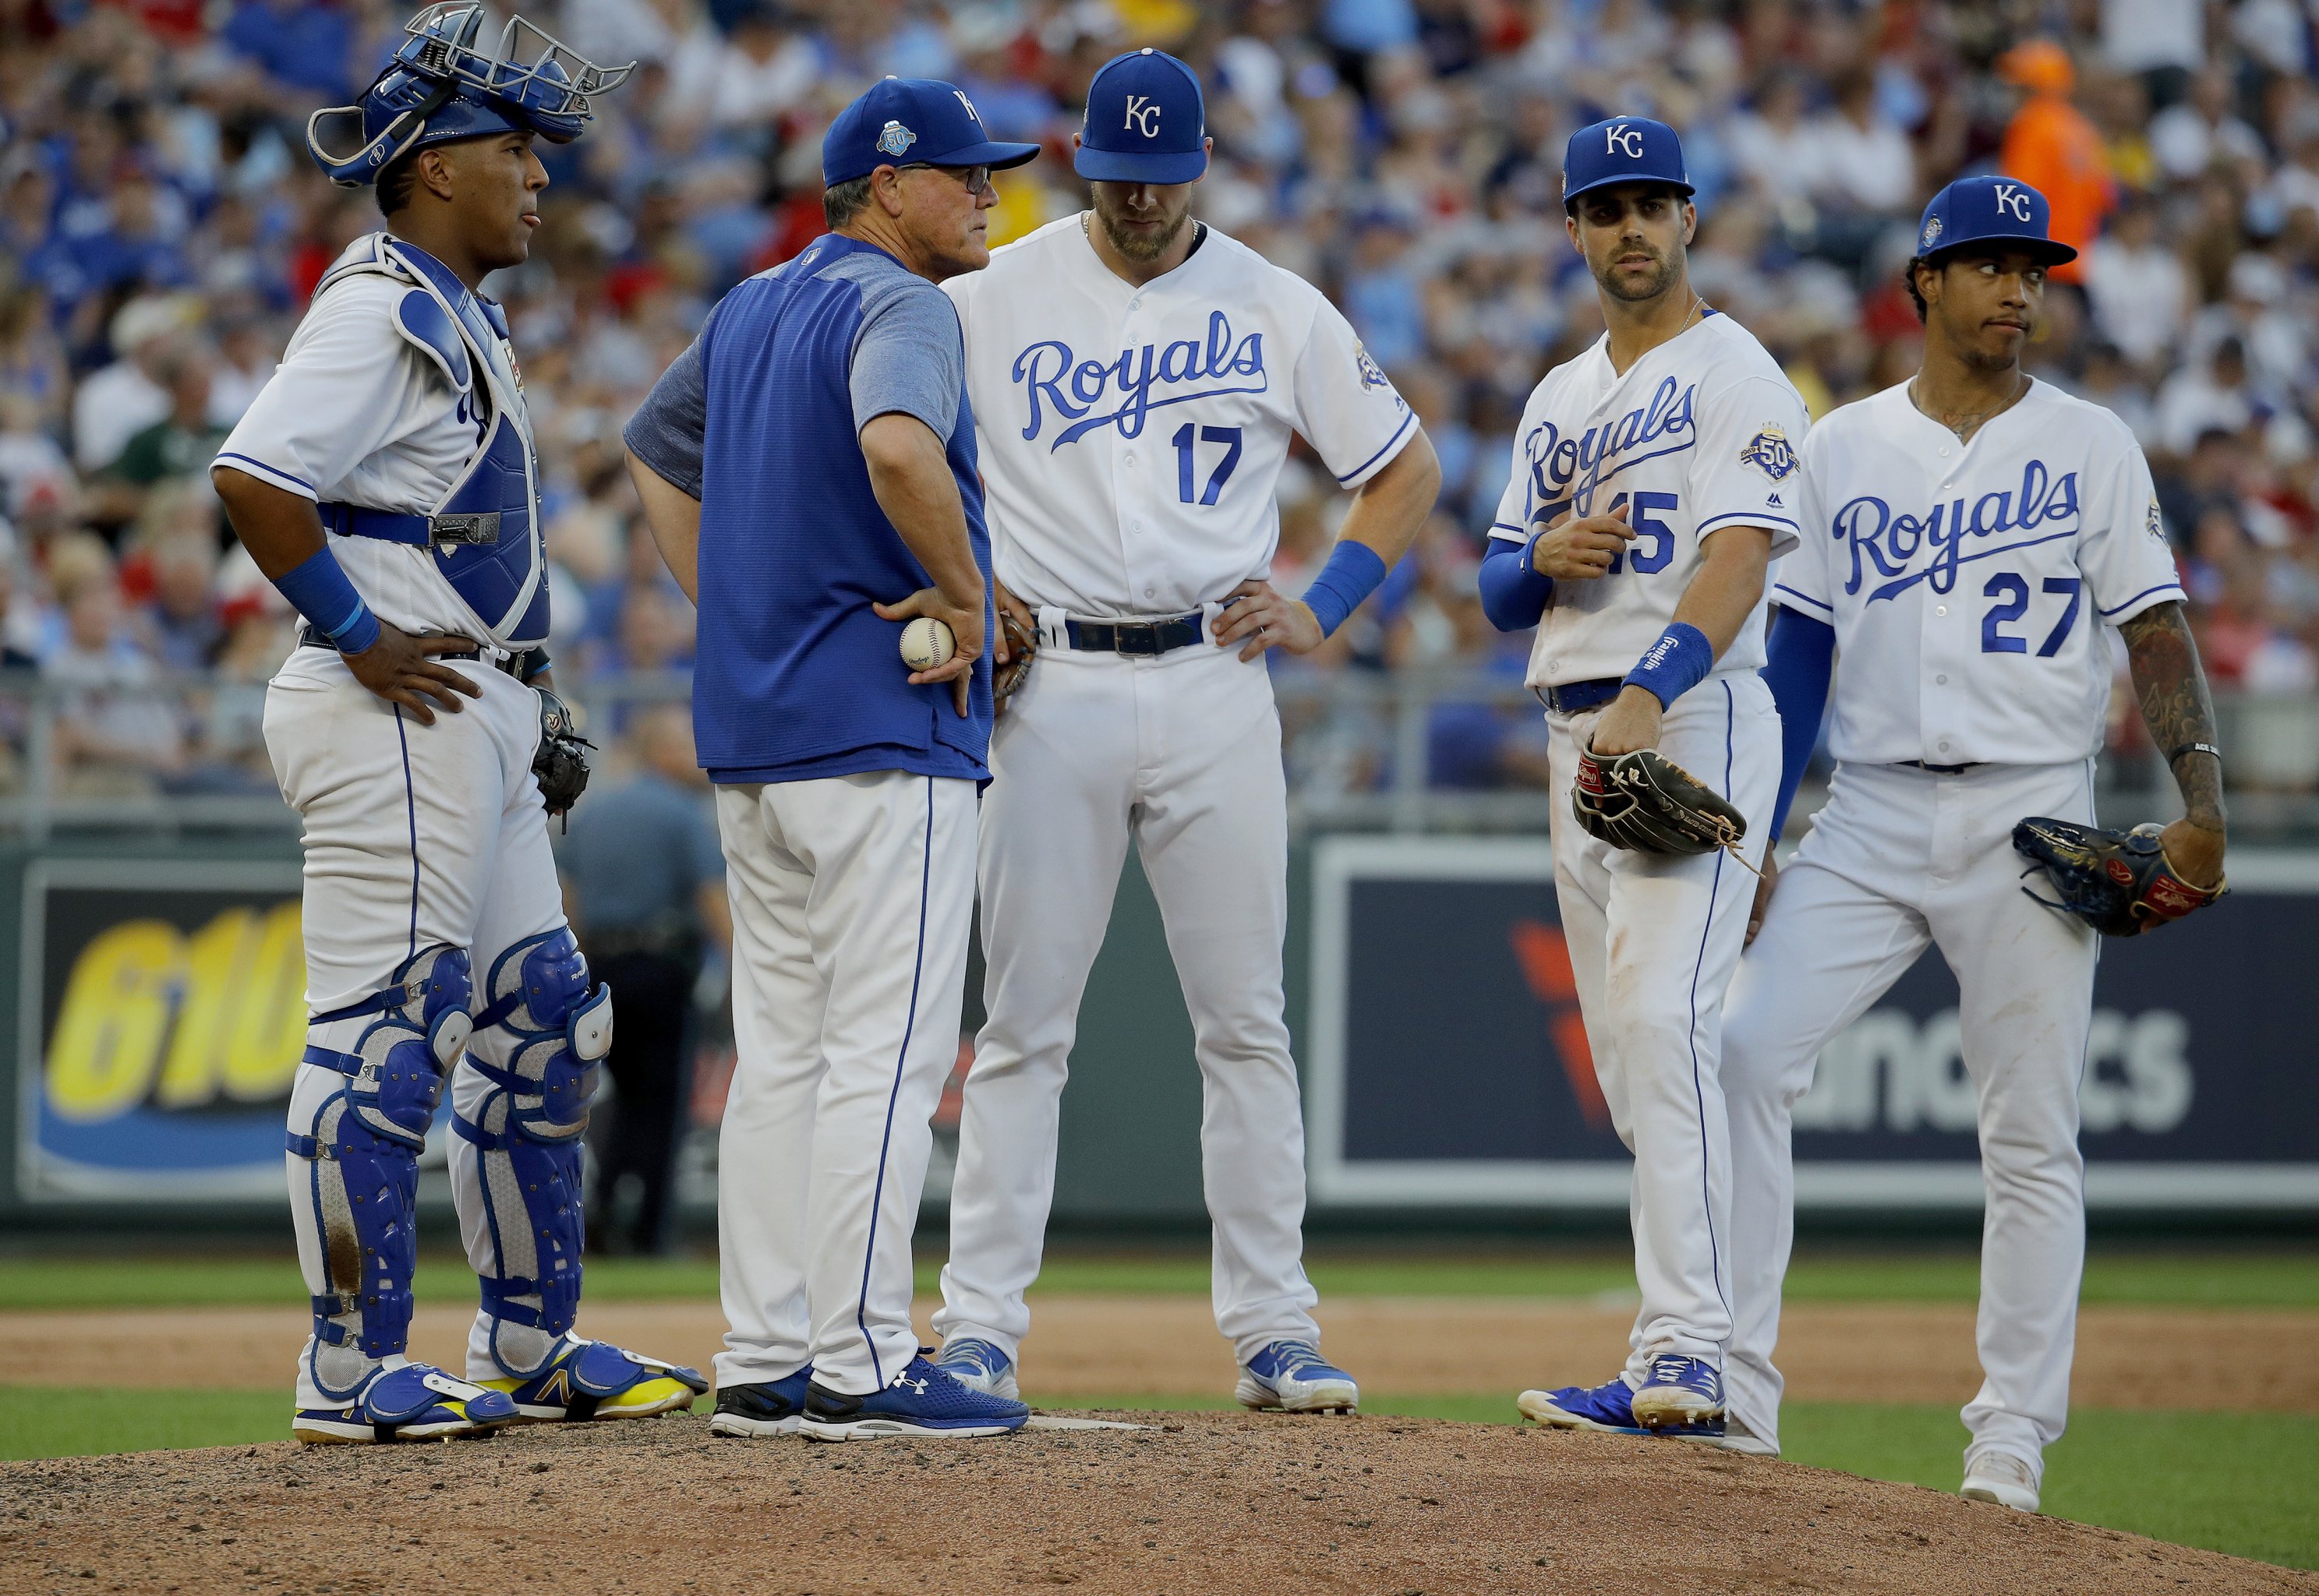 Not a pretty picture: White Sox sink even lower with loss to Royals